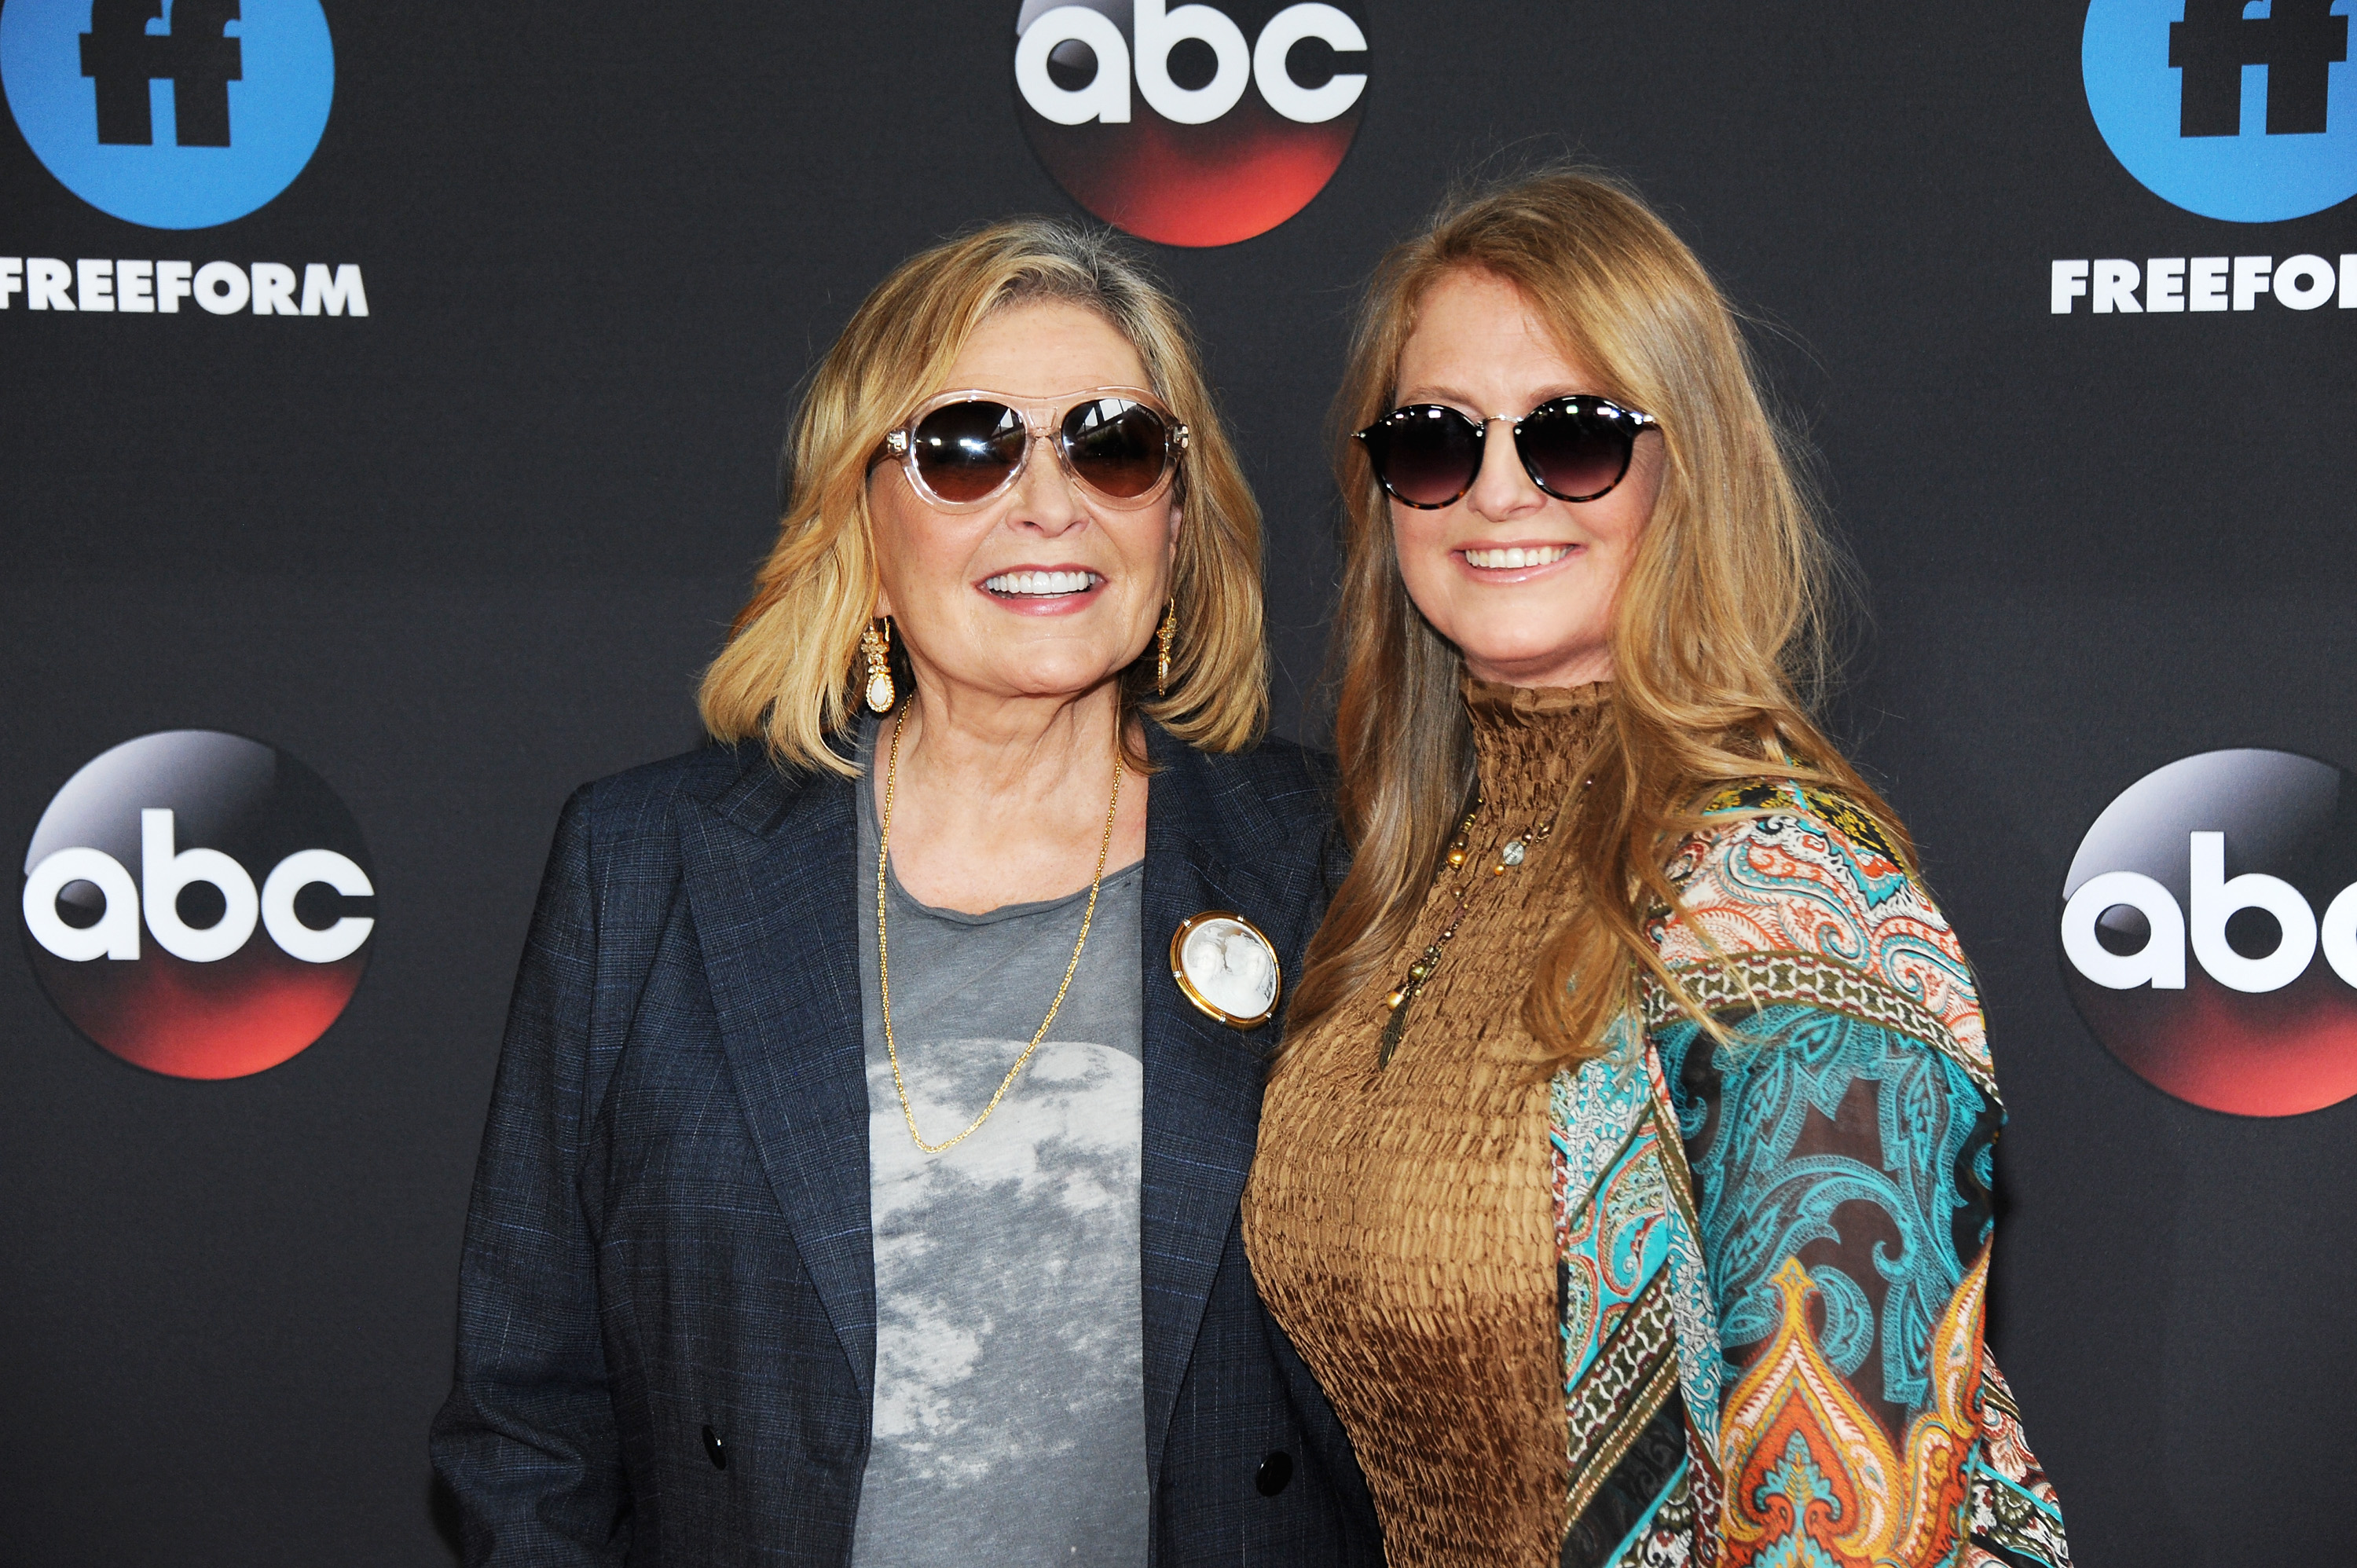 Roseanne Barr and Brandi Brown attend the 2018 Disney, ABC, Freeform Upfront on May 15, 2018 in New York City | Source: Getty Images